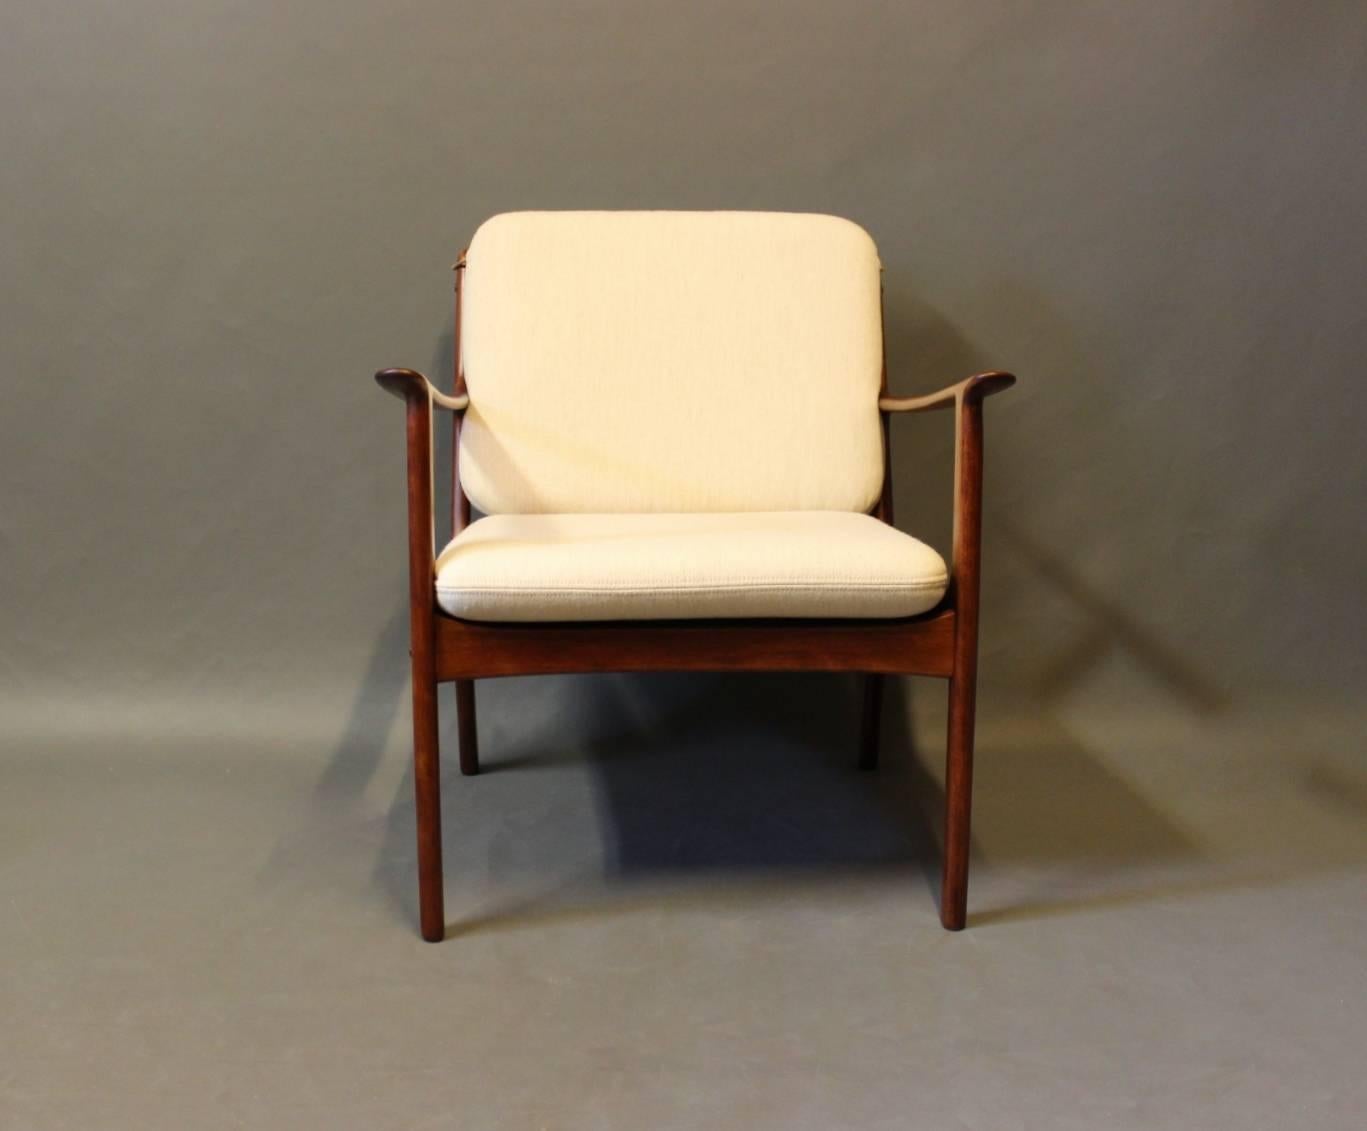 PJ112 easy chair in polished mahogany and with cushions in light wool, designed by Ole Wanscher and manufactured by P. Jeppesen in the 1960s. The chair is in great condition and has just been refurbished.